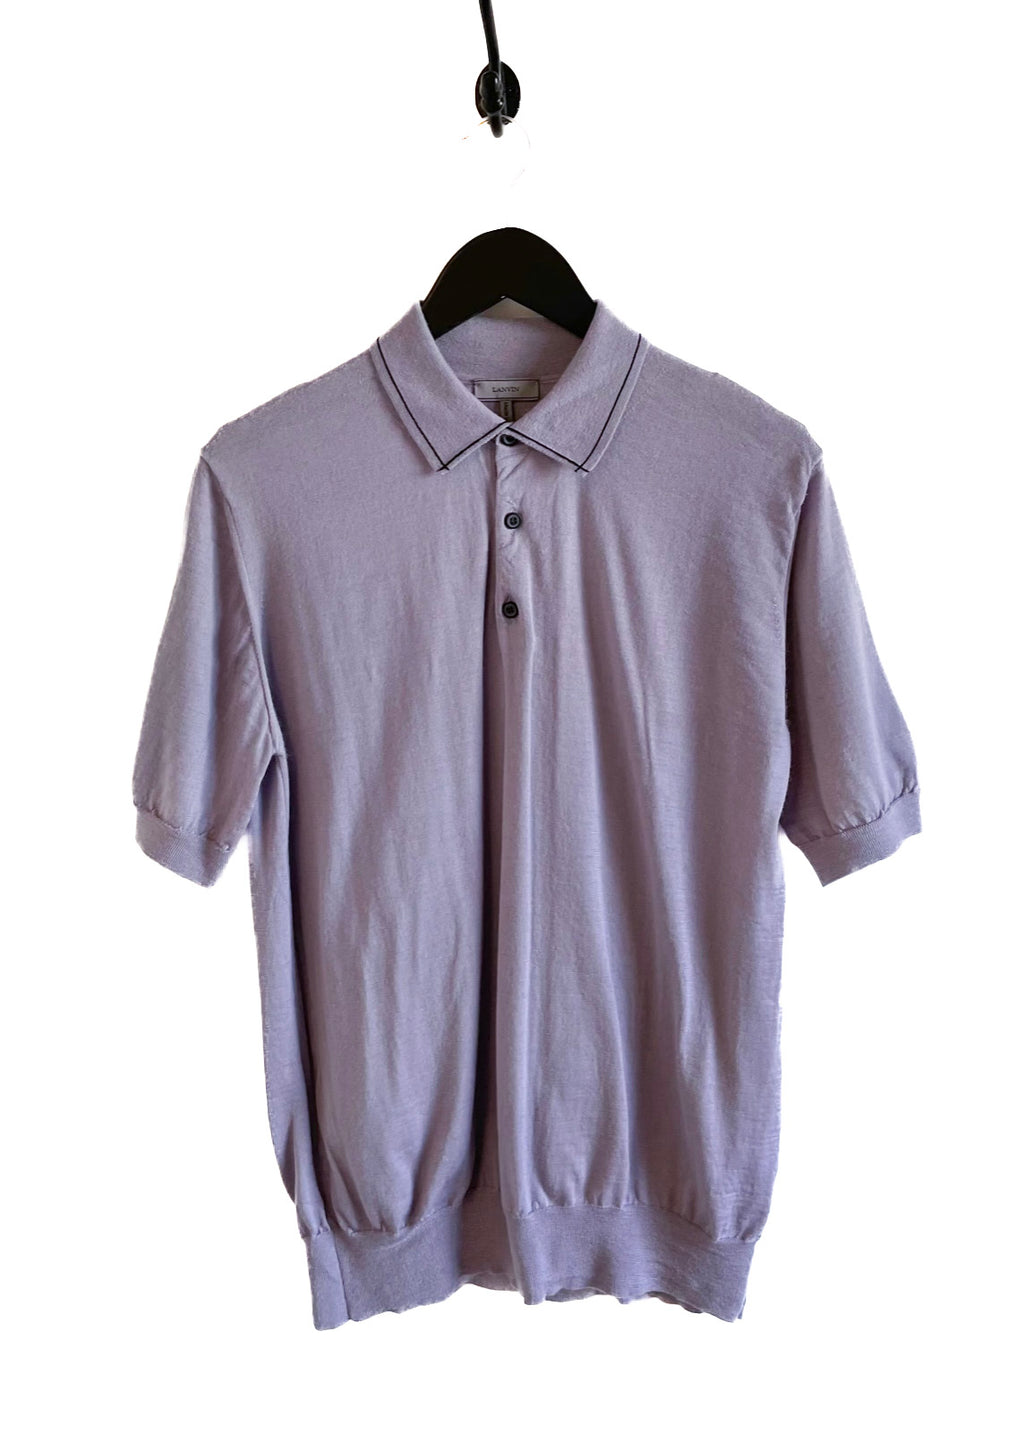 Lanvin Purple Wool Polo with Black Trim Accents